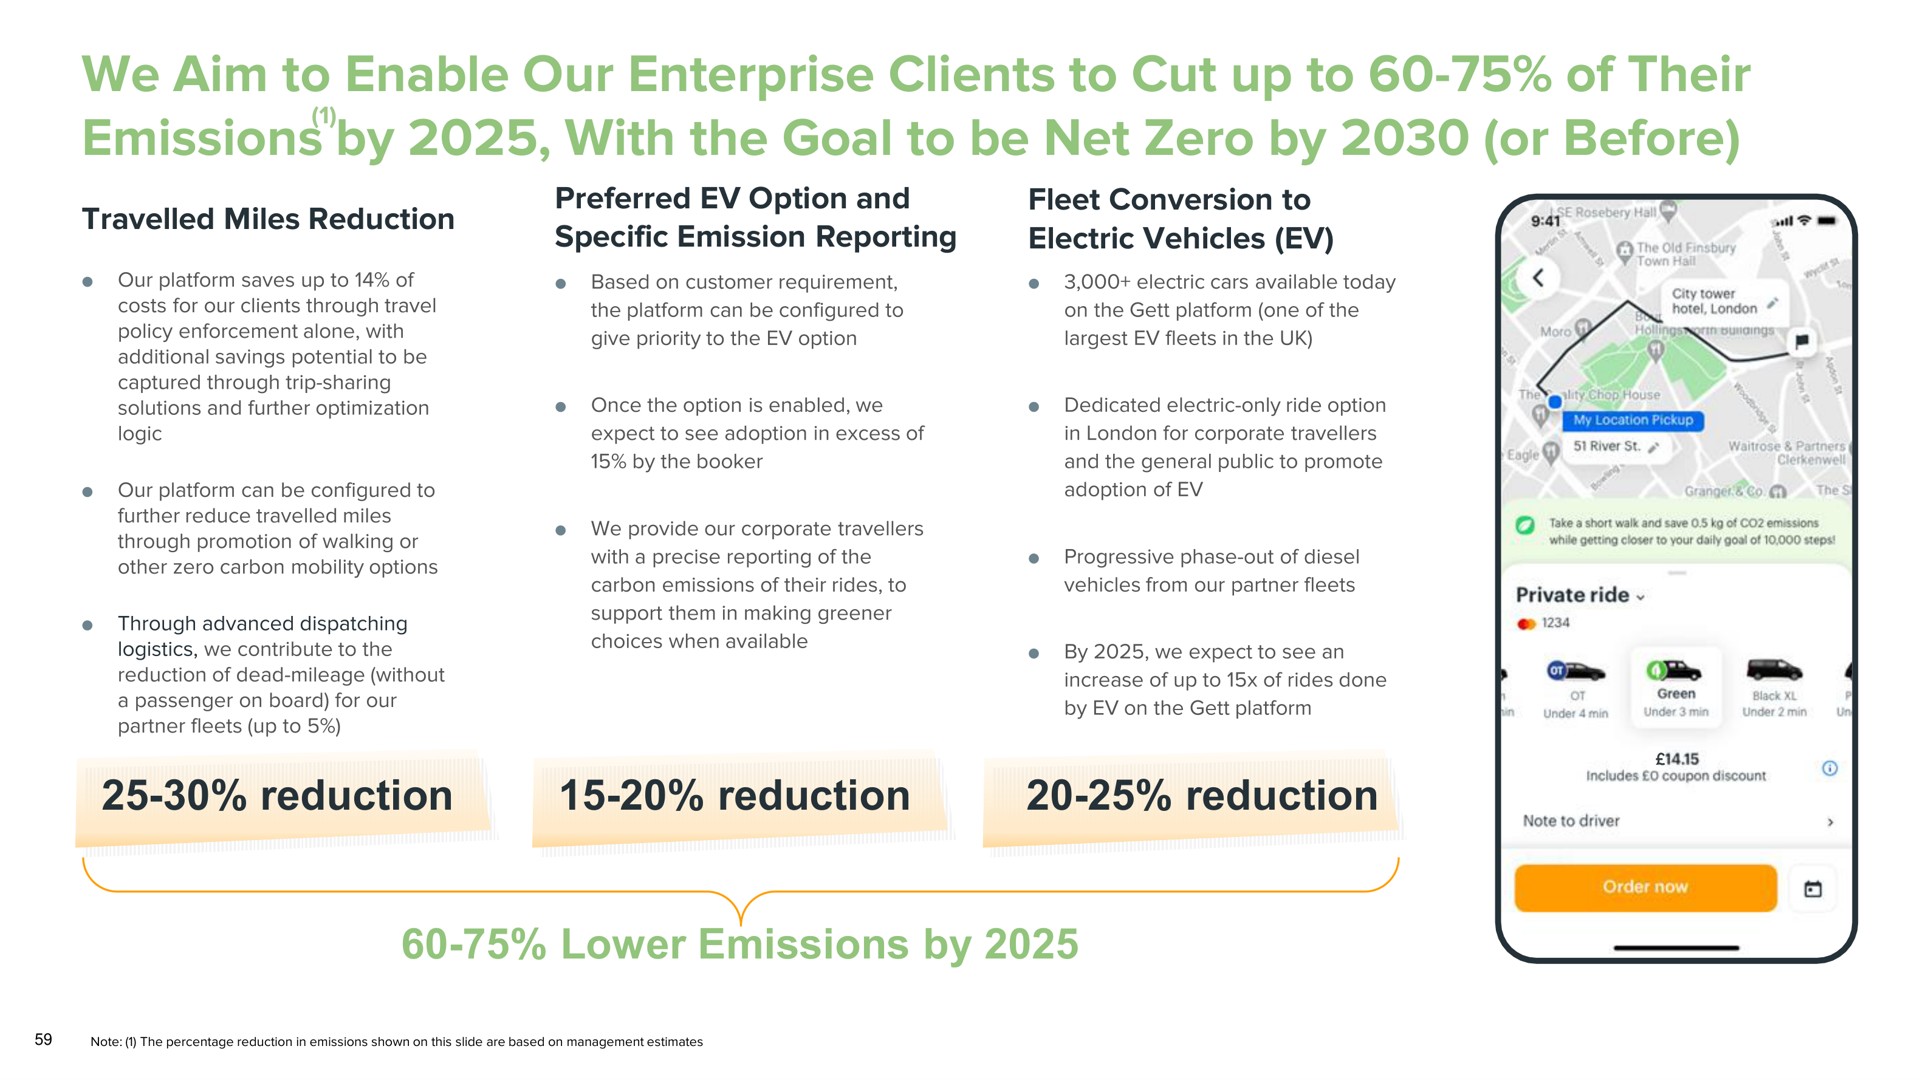 we aim to enable our enterprise clients to cut up to of their emissions by with the goal to be net zero by or before reduction reduction reduction lower emissions by | Gett